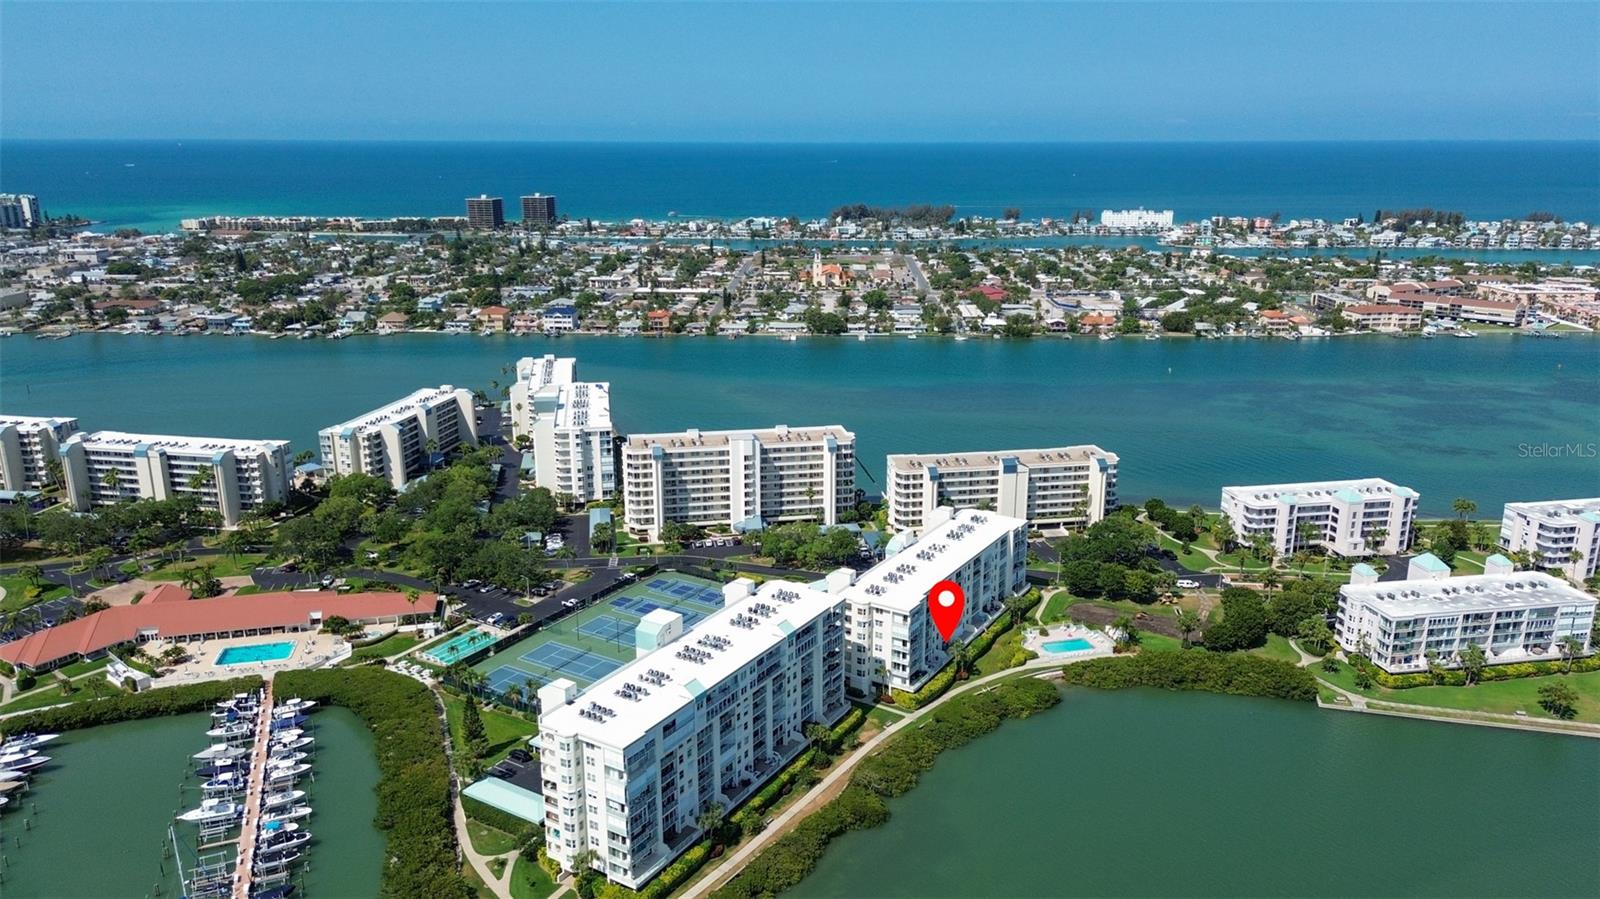 Feel the fabulous breezes from the Gulf of Mexico and the Intracoastal water way!  This is PARADISE!!!